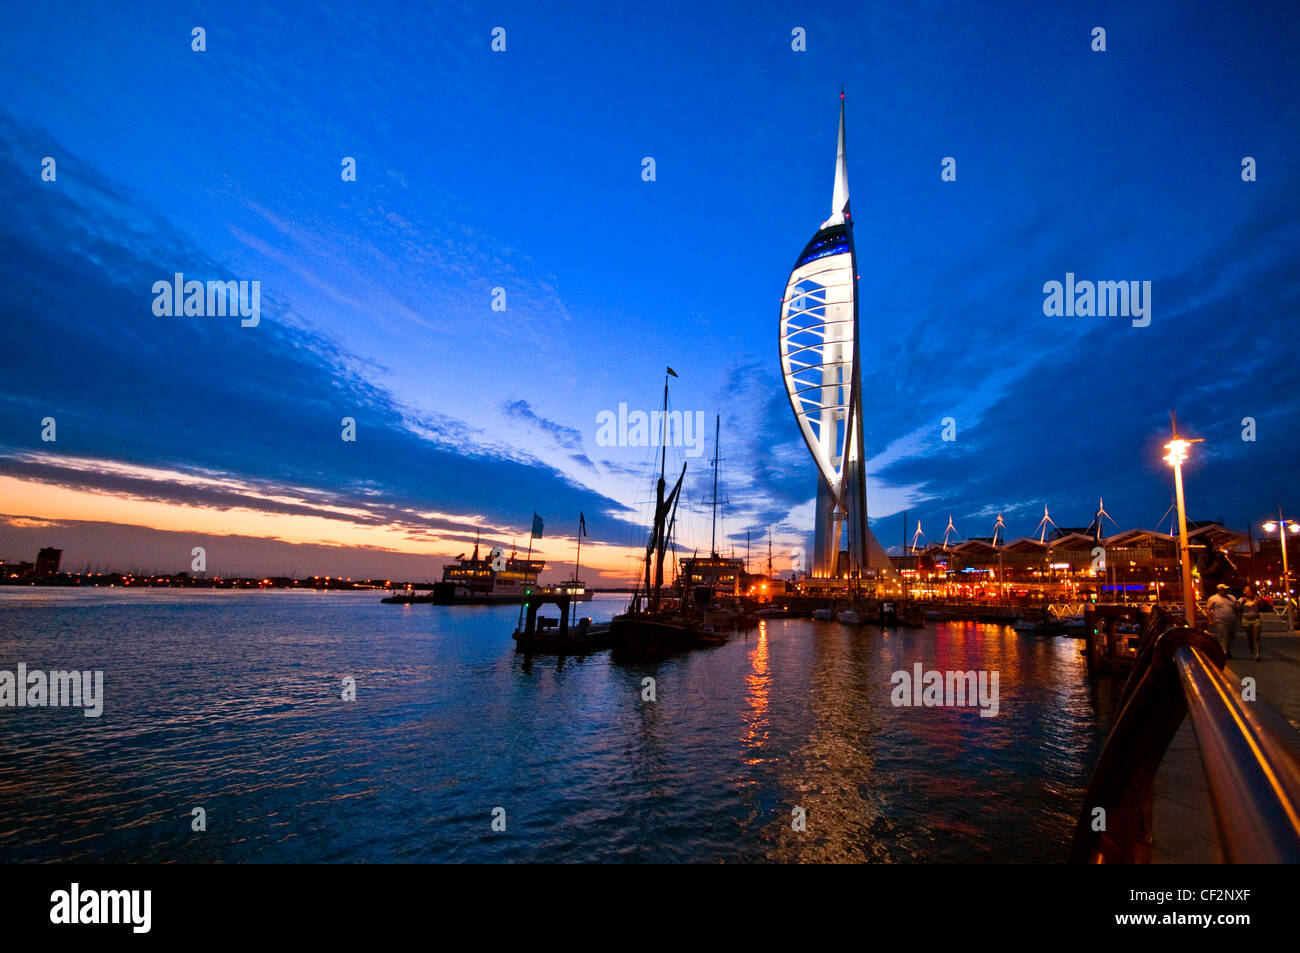 An early evening view of the 170m high Spinnaker Tower at Gunwharf Quays in Portsmouth Harbour. Stock Photo